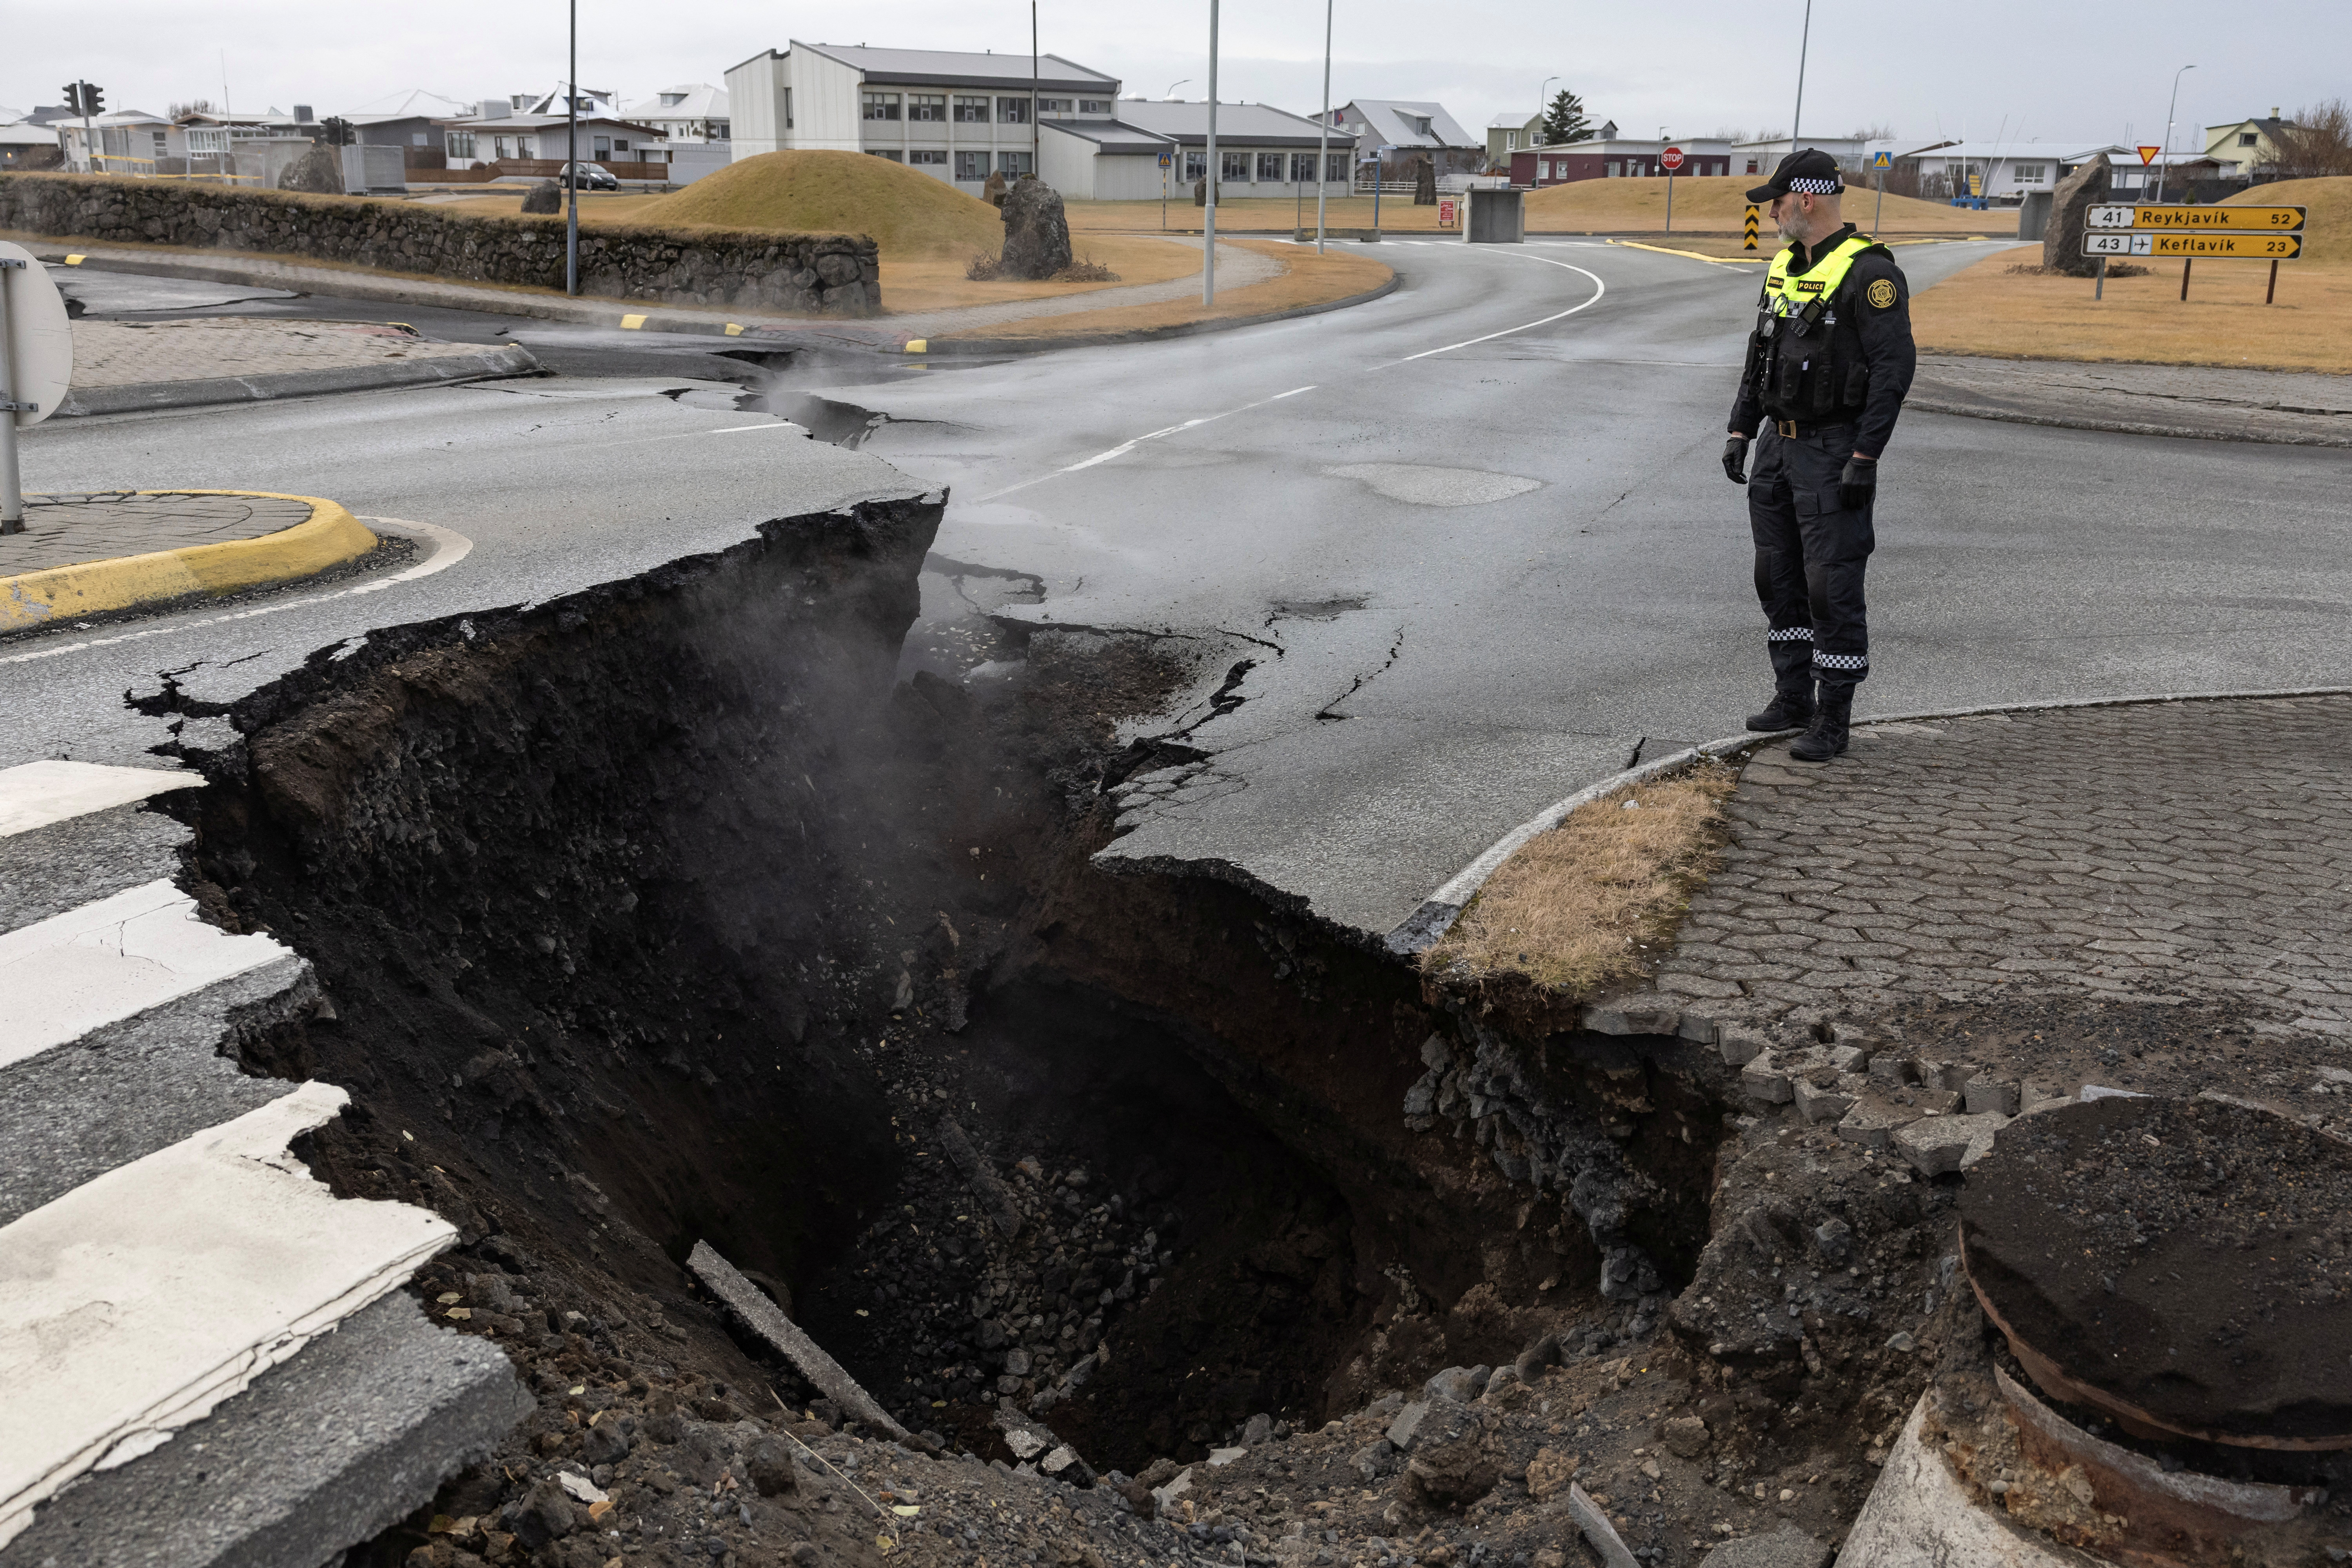 A police officer stands by the crack in a road in the fishing town of Grindavik, which was evacuated due to volcanic activity./Marko Djurica /Reuters
